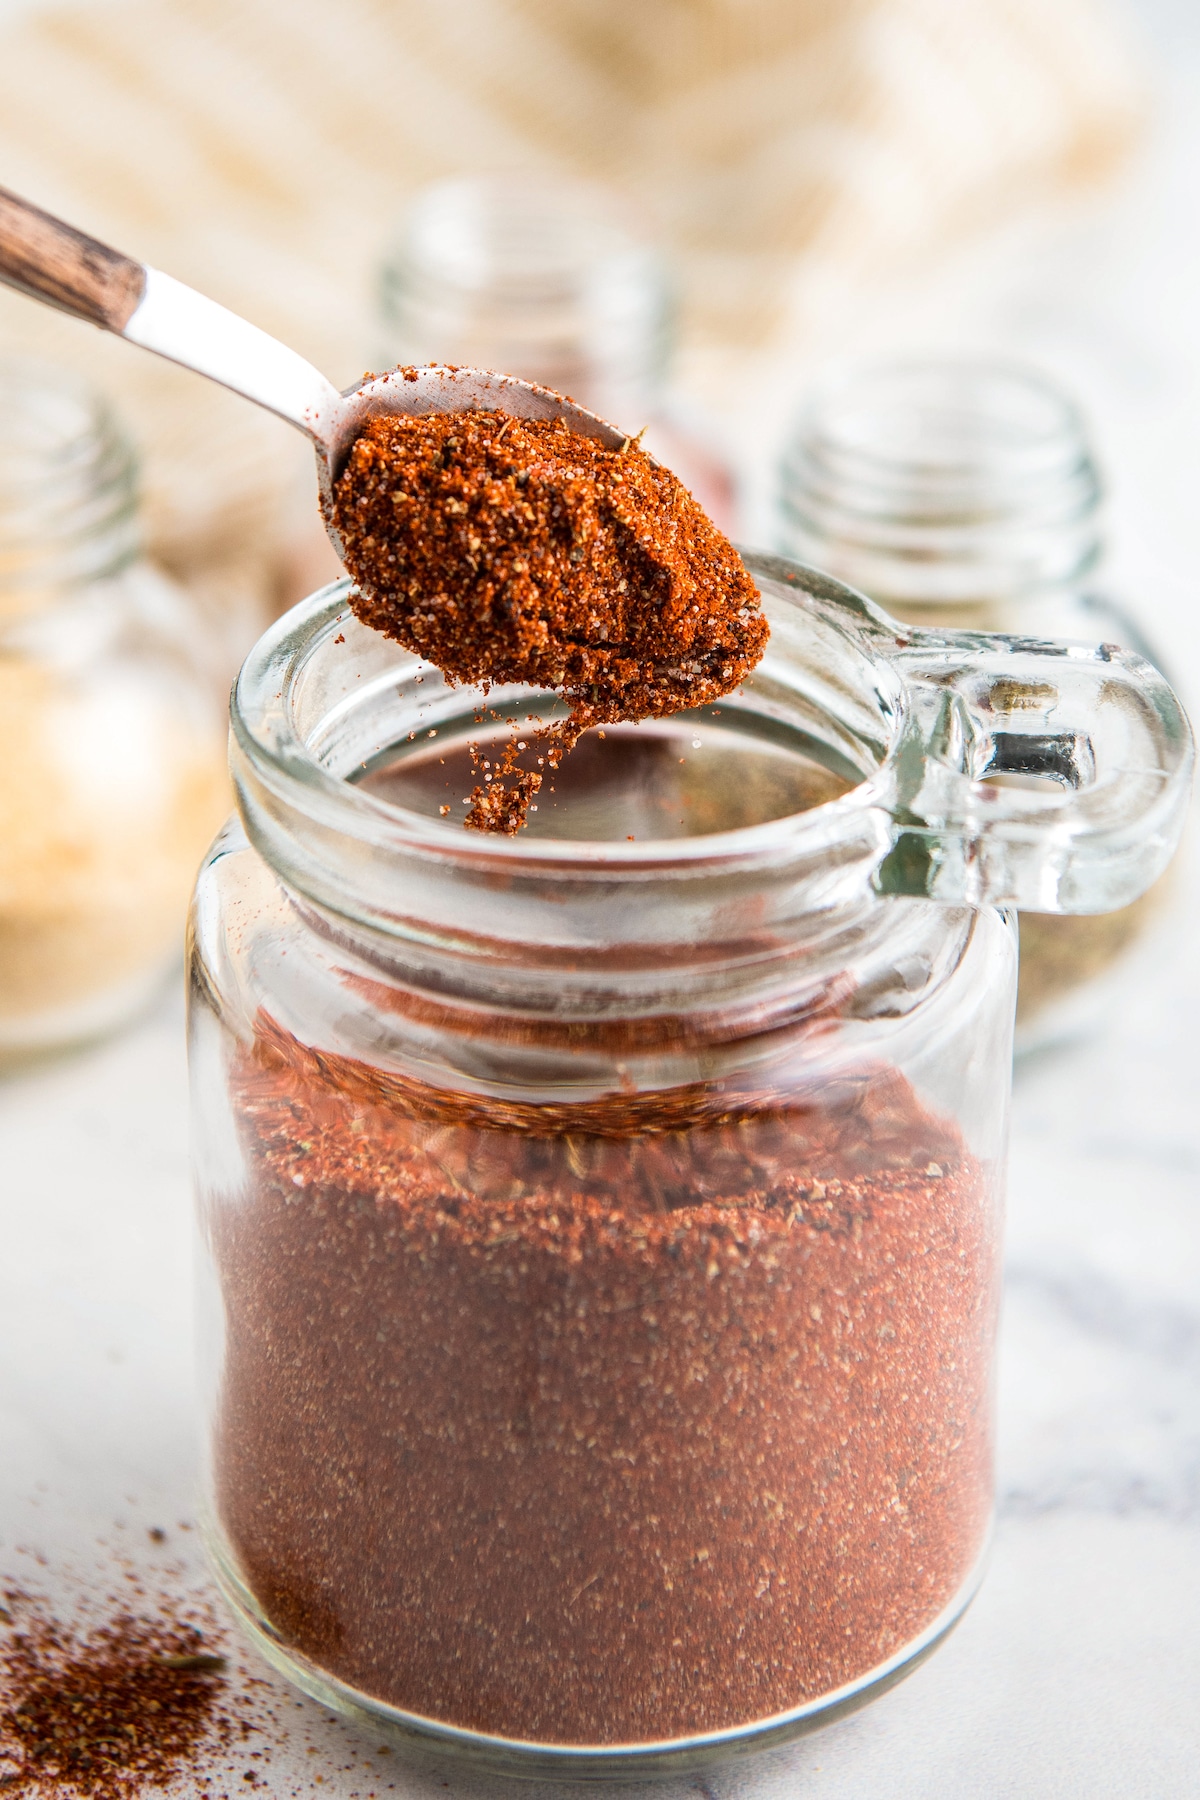 Cajun seasoning being poured off a spoon into a glass jar.